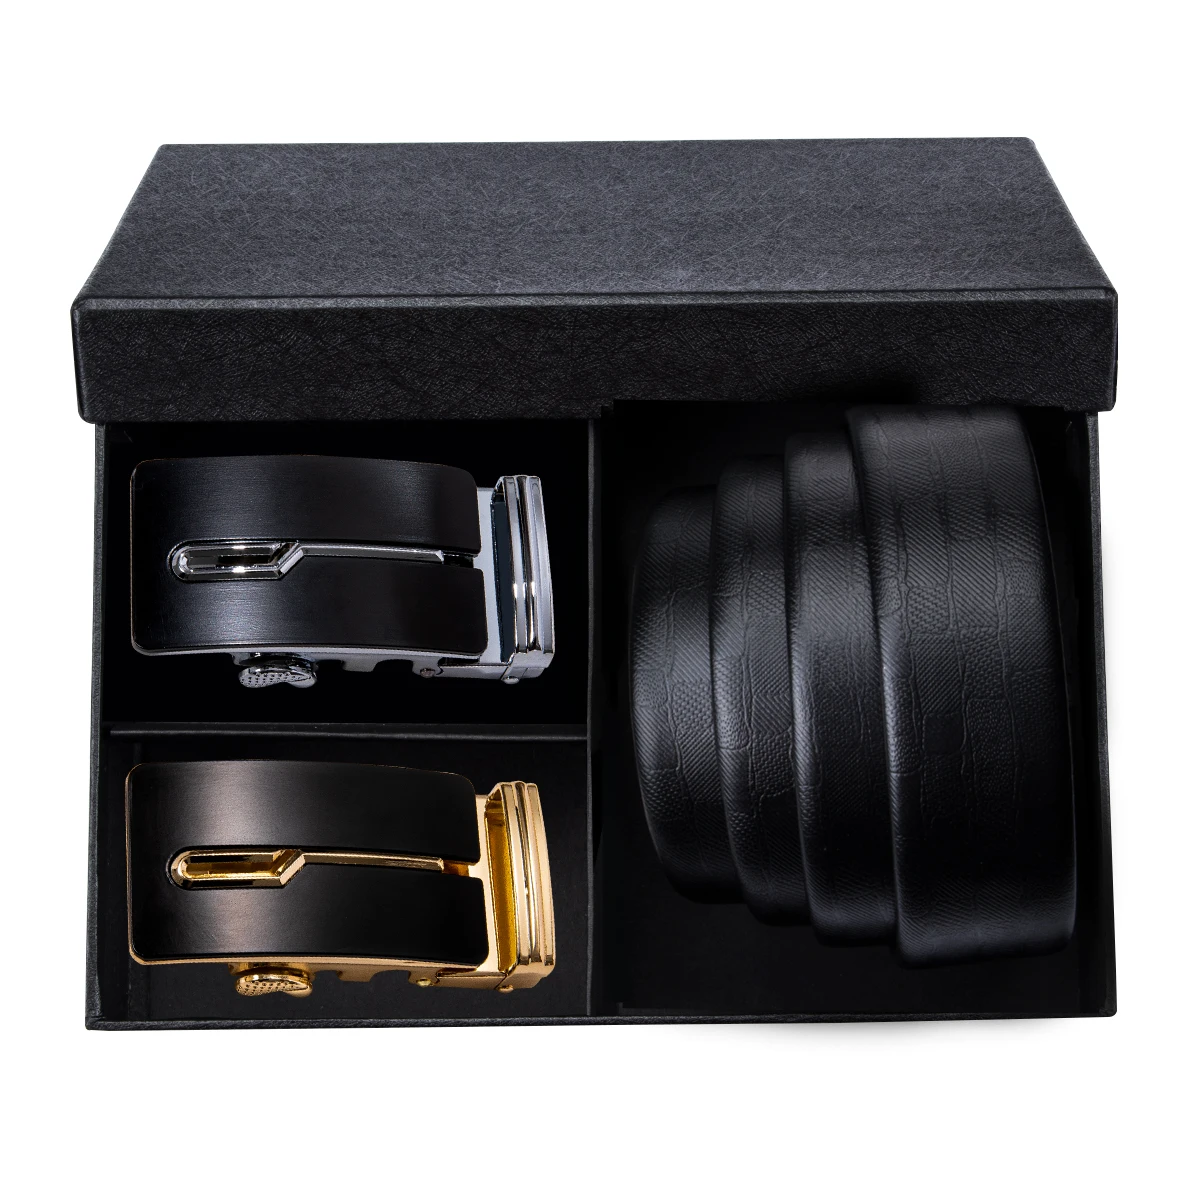 Men Belt Black Leather Belt Automatic Buckle Removable Belts Gift Box for Men Formal Waist Strap For Business Party  Barry.Wang